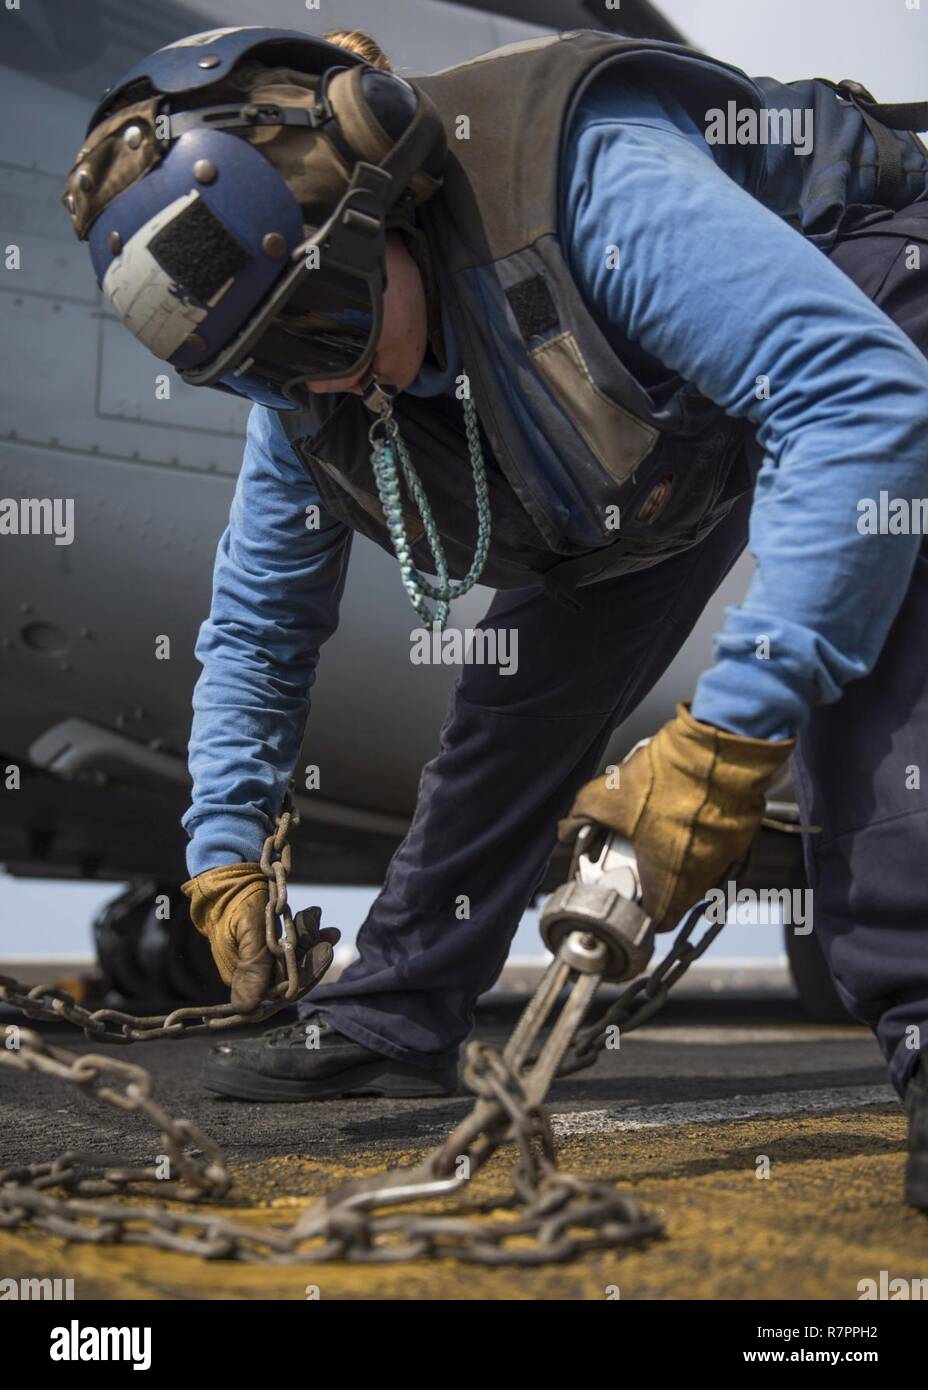 INDIAN OCEAN (March 27, 2017) Airman Christina Kozierowski, from Huntsville, Alabama, attaches a tie-down chain to a pad eye to secure an MV-22B Osprey, assigned to the Ridge Runners of Marine Medium Tiltrotor Squadron (VMM) 163, on the flight deck of the amphibious assault ship USS Makin Island (LHD 8). The ship and its amphibious ready group, with the embarked 11th Marine Expeditionary Unit, are operating in the Indo-Asia-Pacific region to enhance amphibious capability with regional partners and to serve as a ready-response force for any type of contingency. Stock Photo